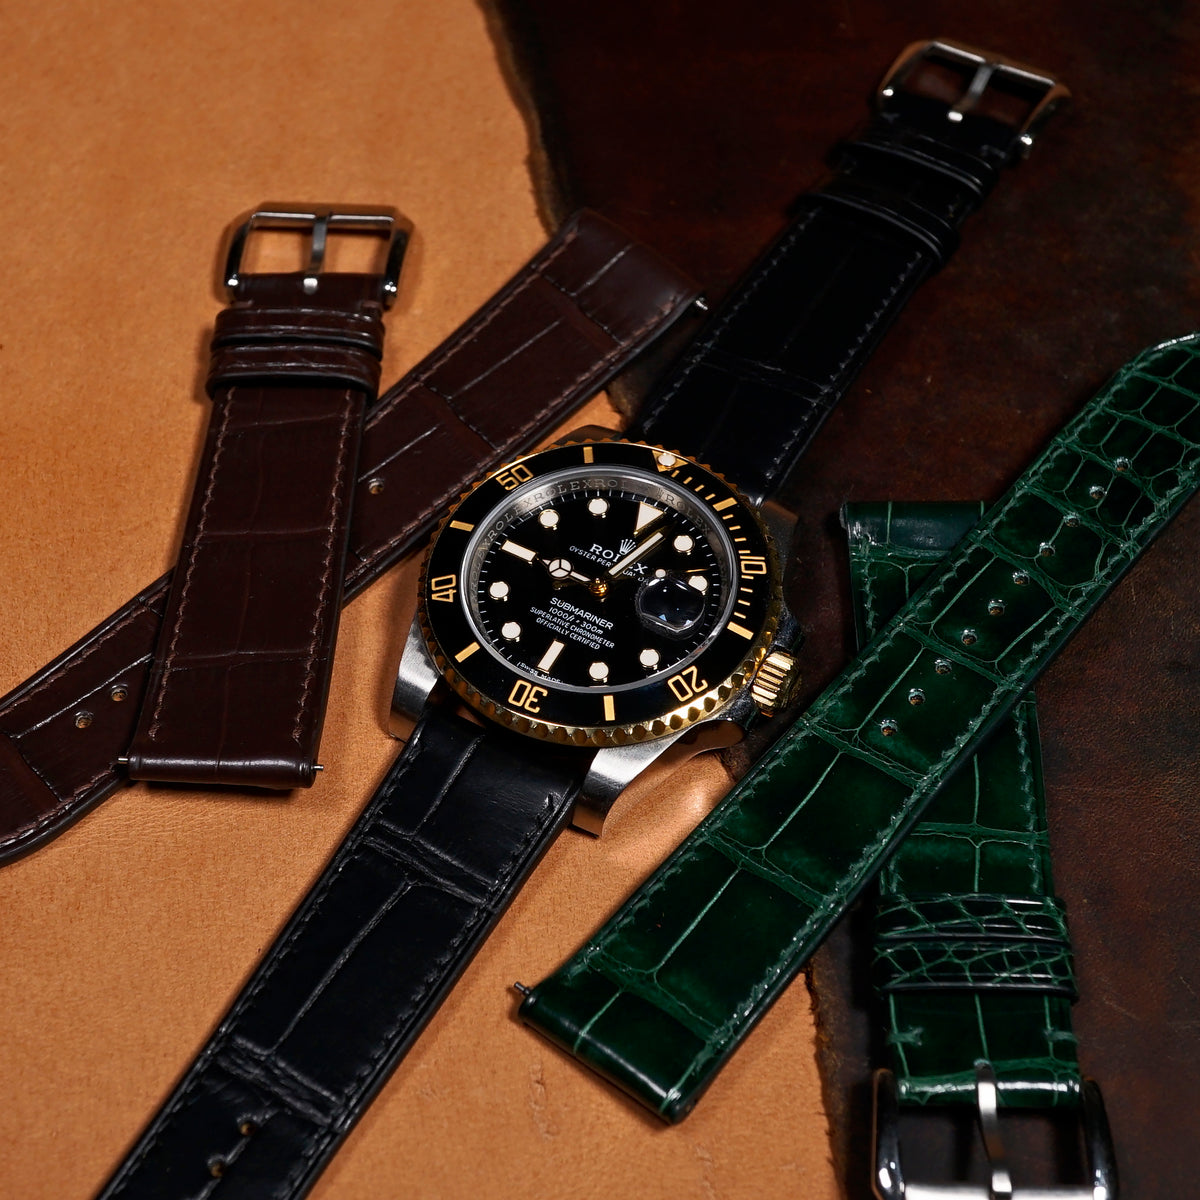 Alligator Leather Watch Strap in Black (Non-Glossy)